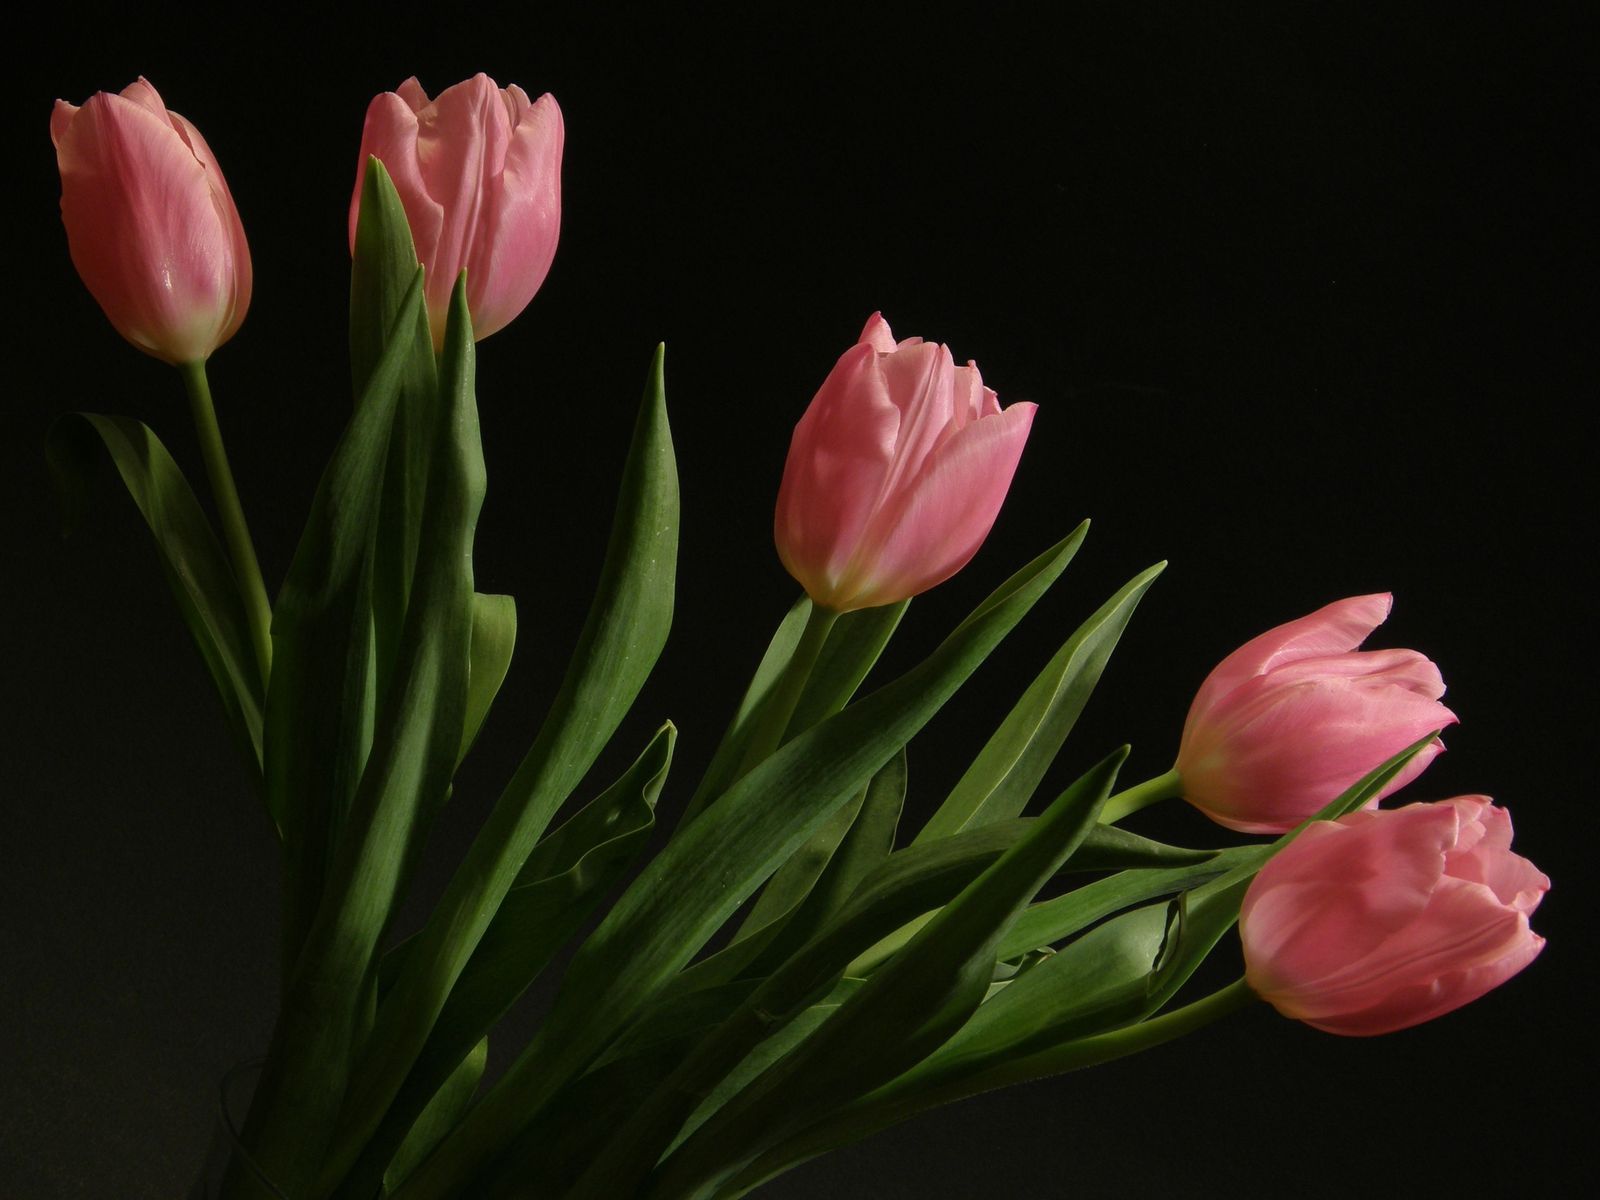 the large bouquet of pink tulips on the table